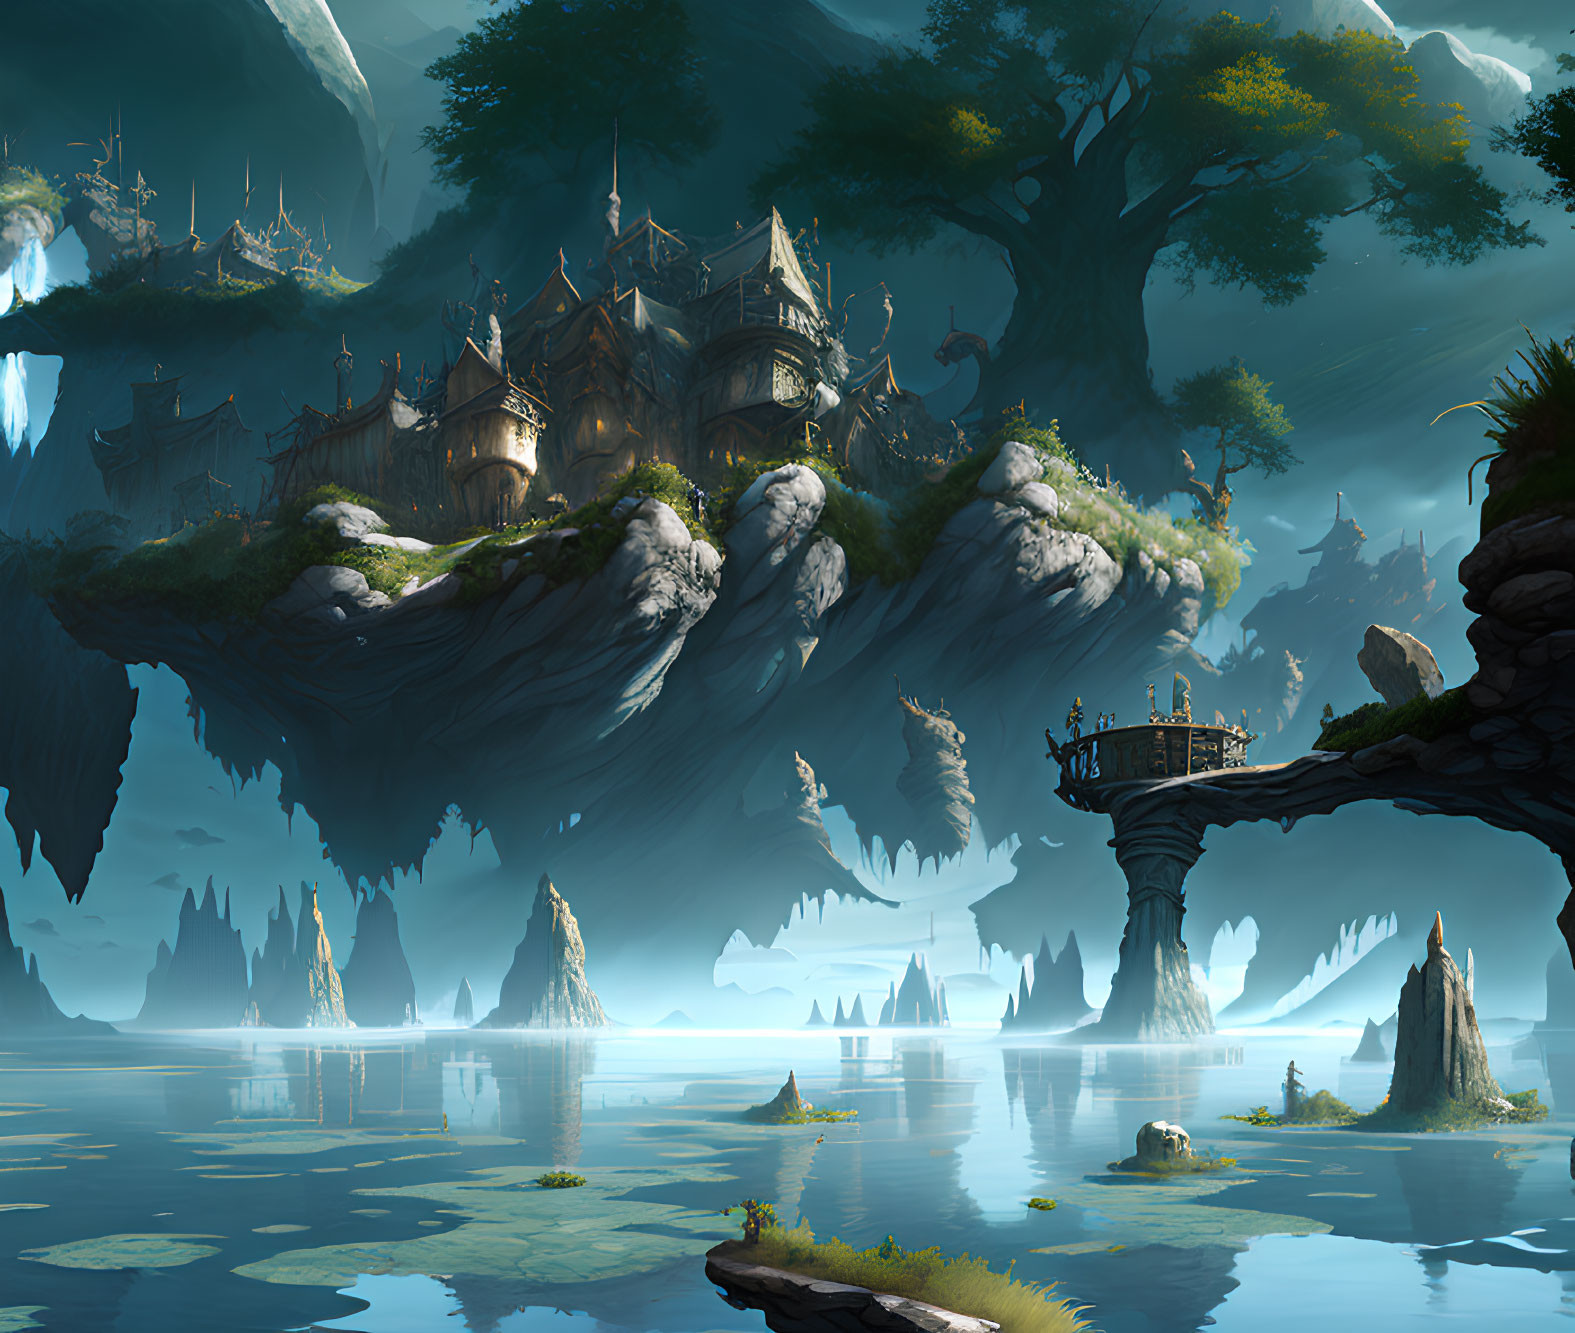 Floating Islands and Tree Houses in Ethereal Fantasy Landscape